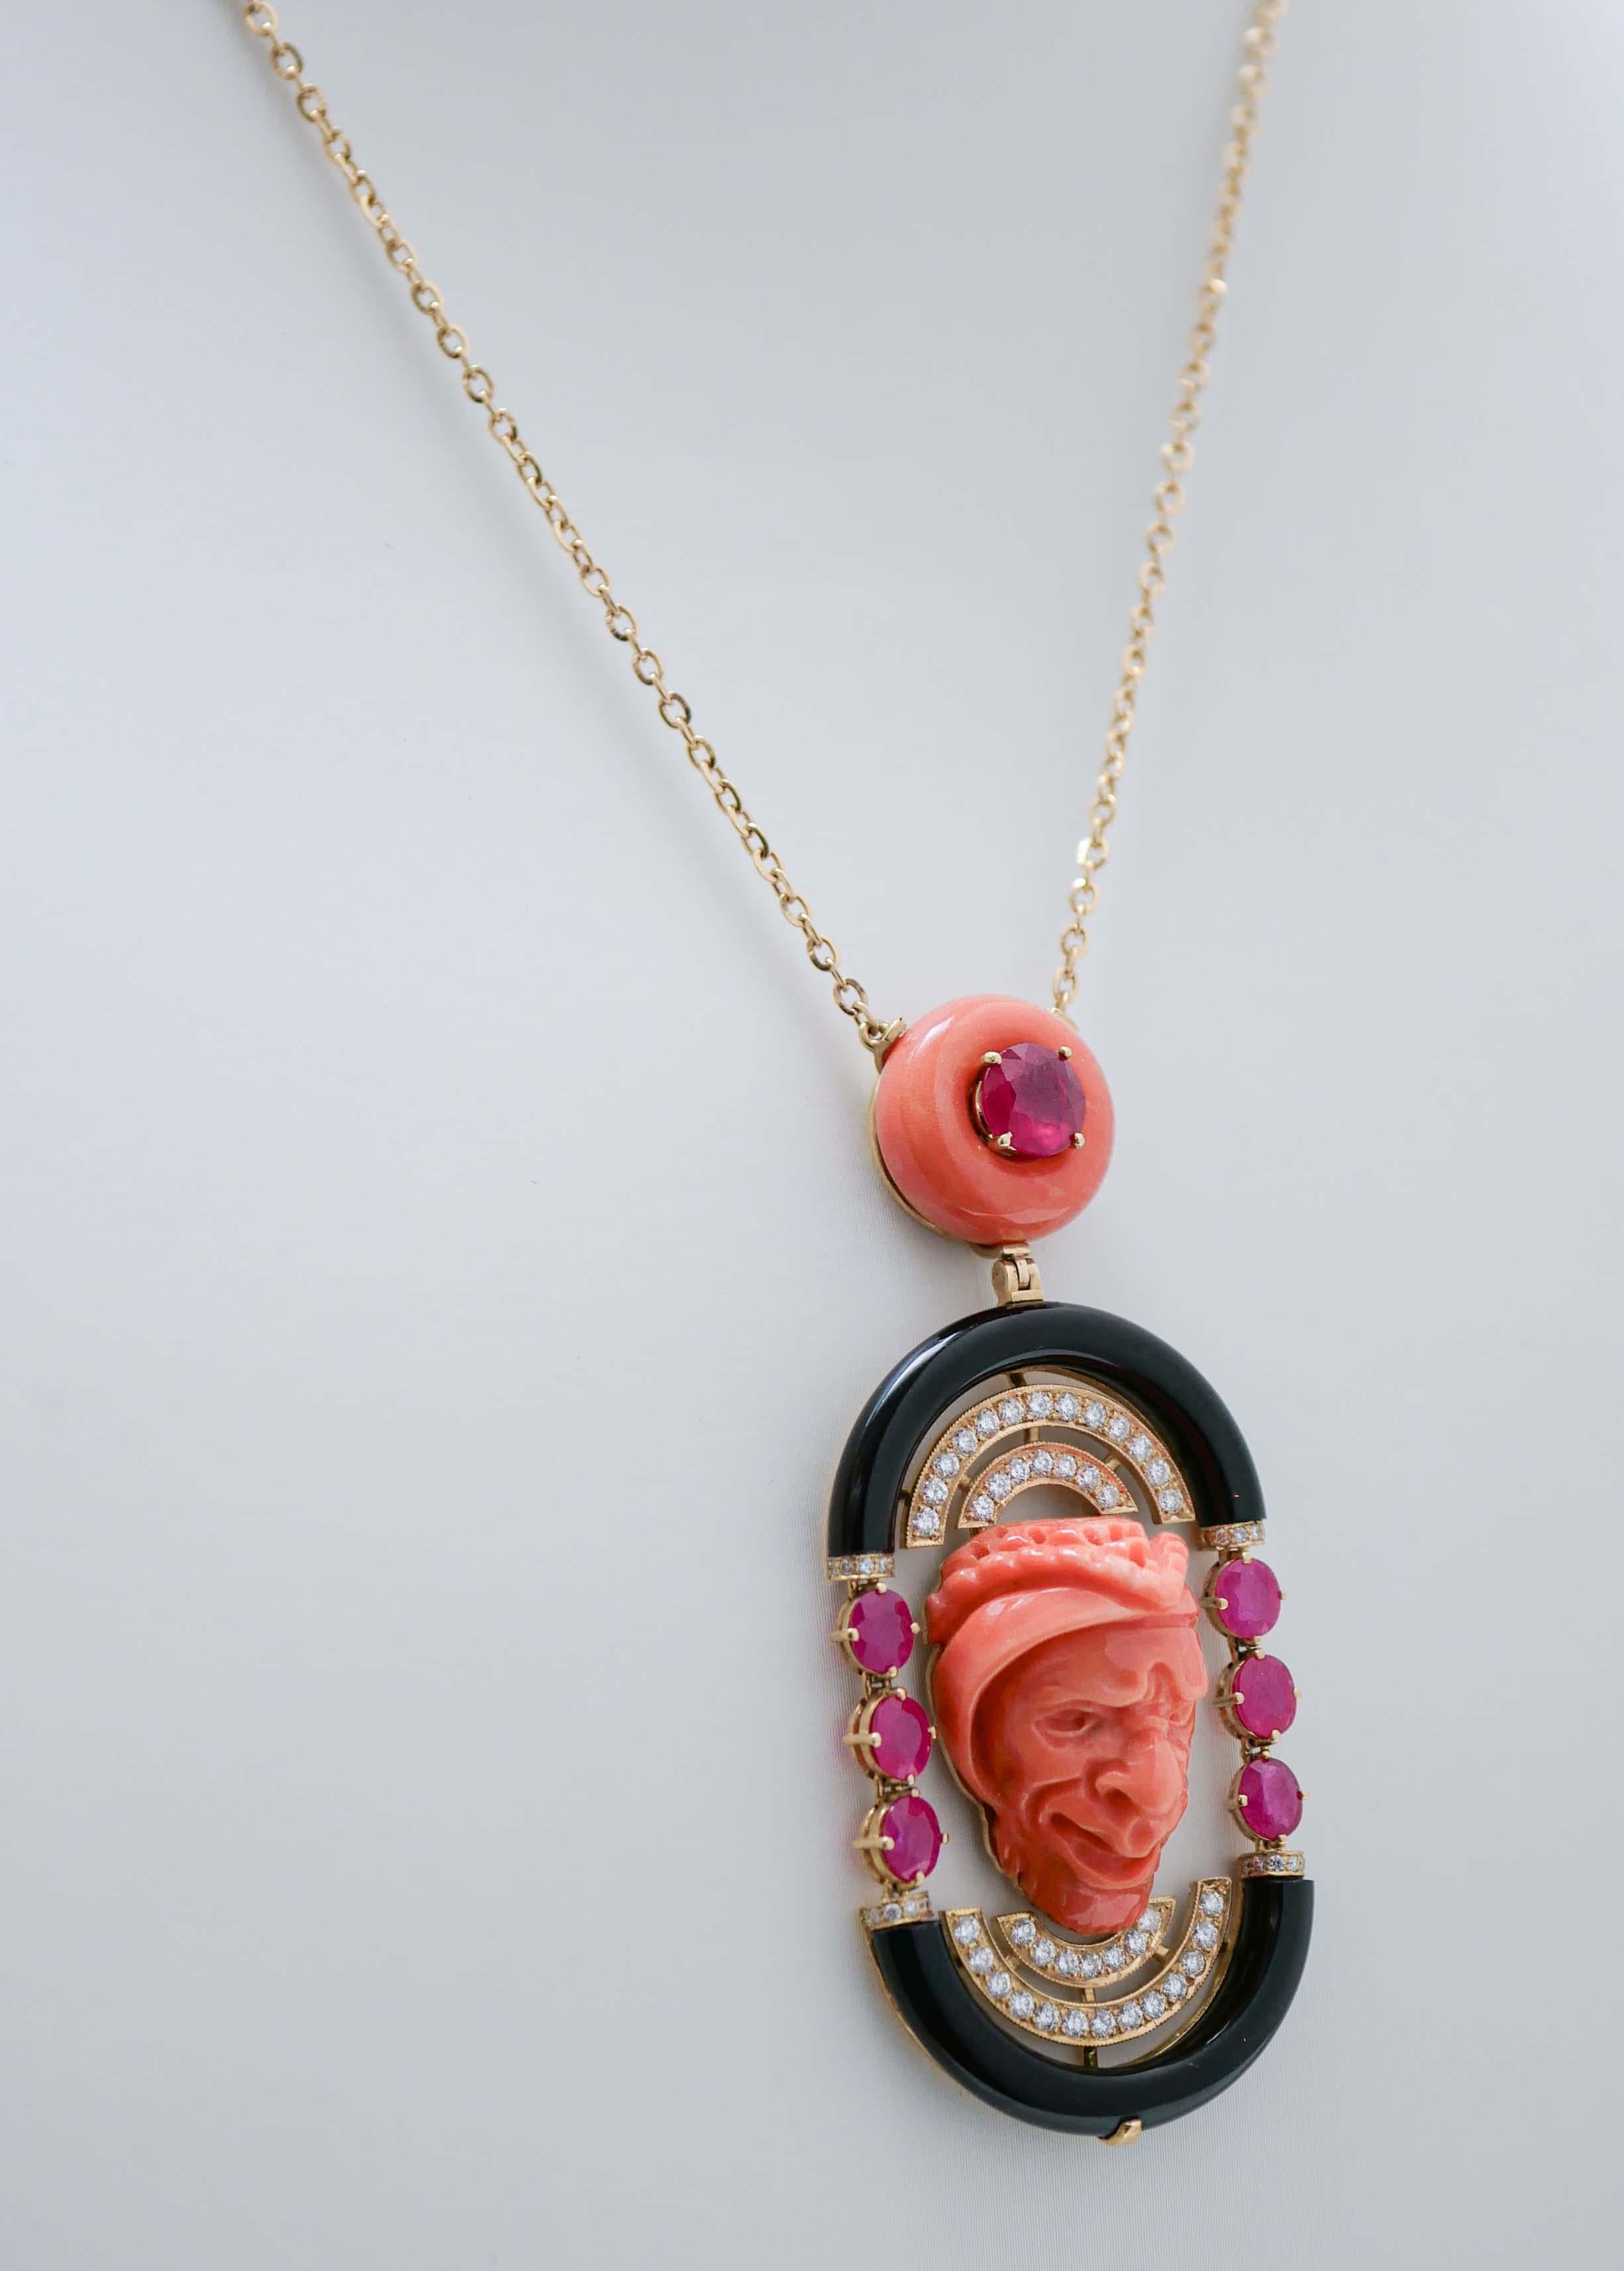 Mixed Cut Coral, Rubies, Onyx, Diamonds, 18 Karat Yellow Gold Pendant Necklace. For Sale